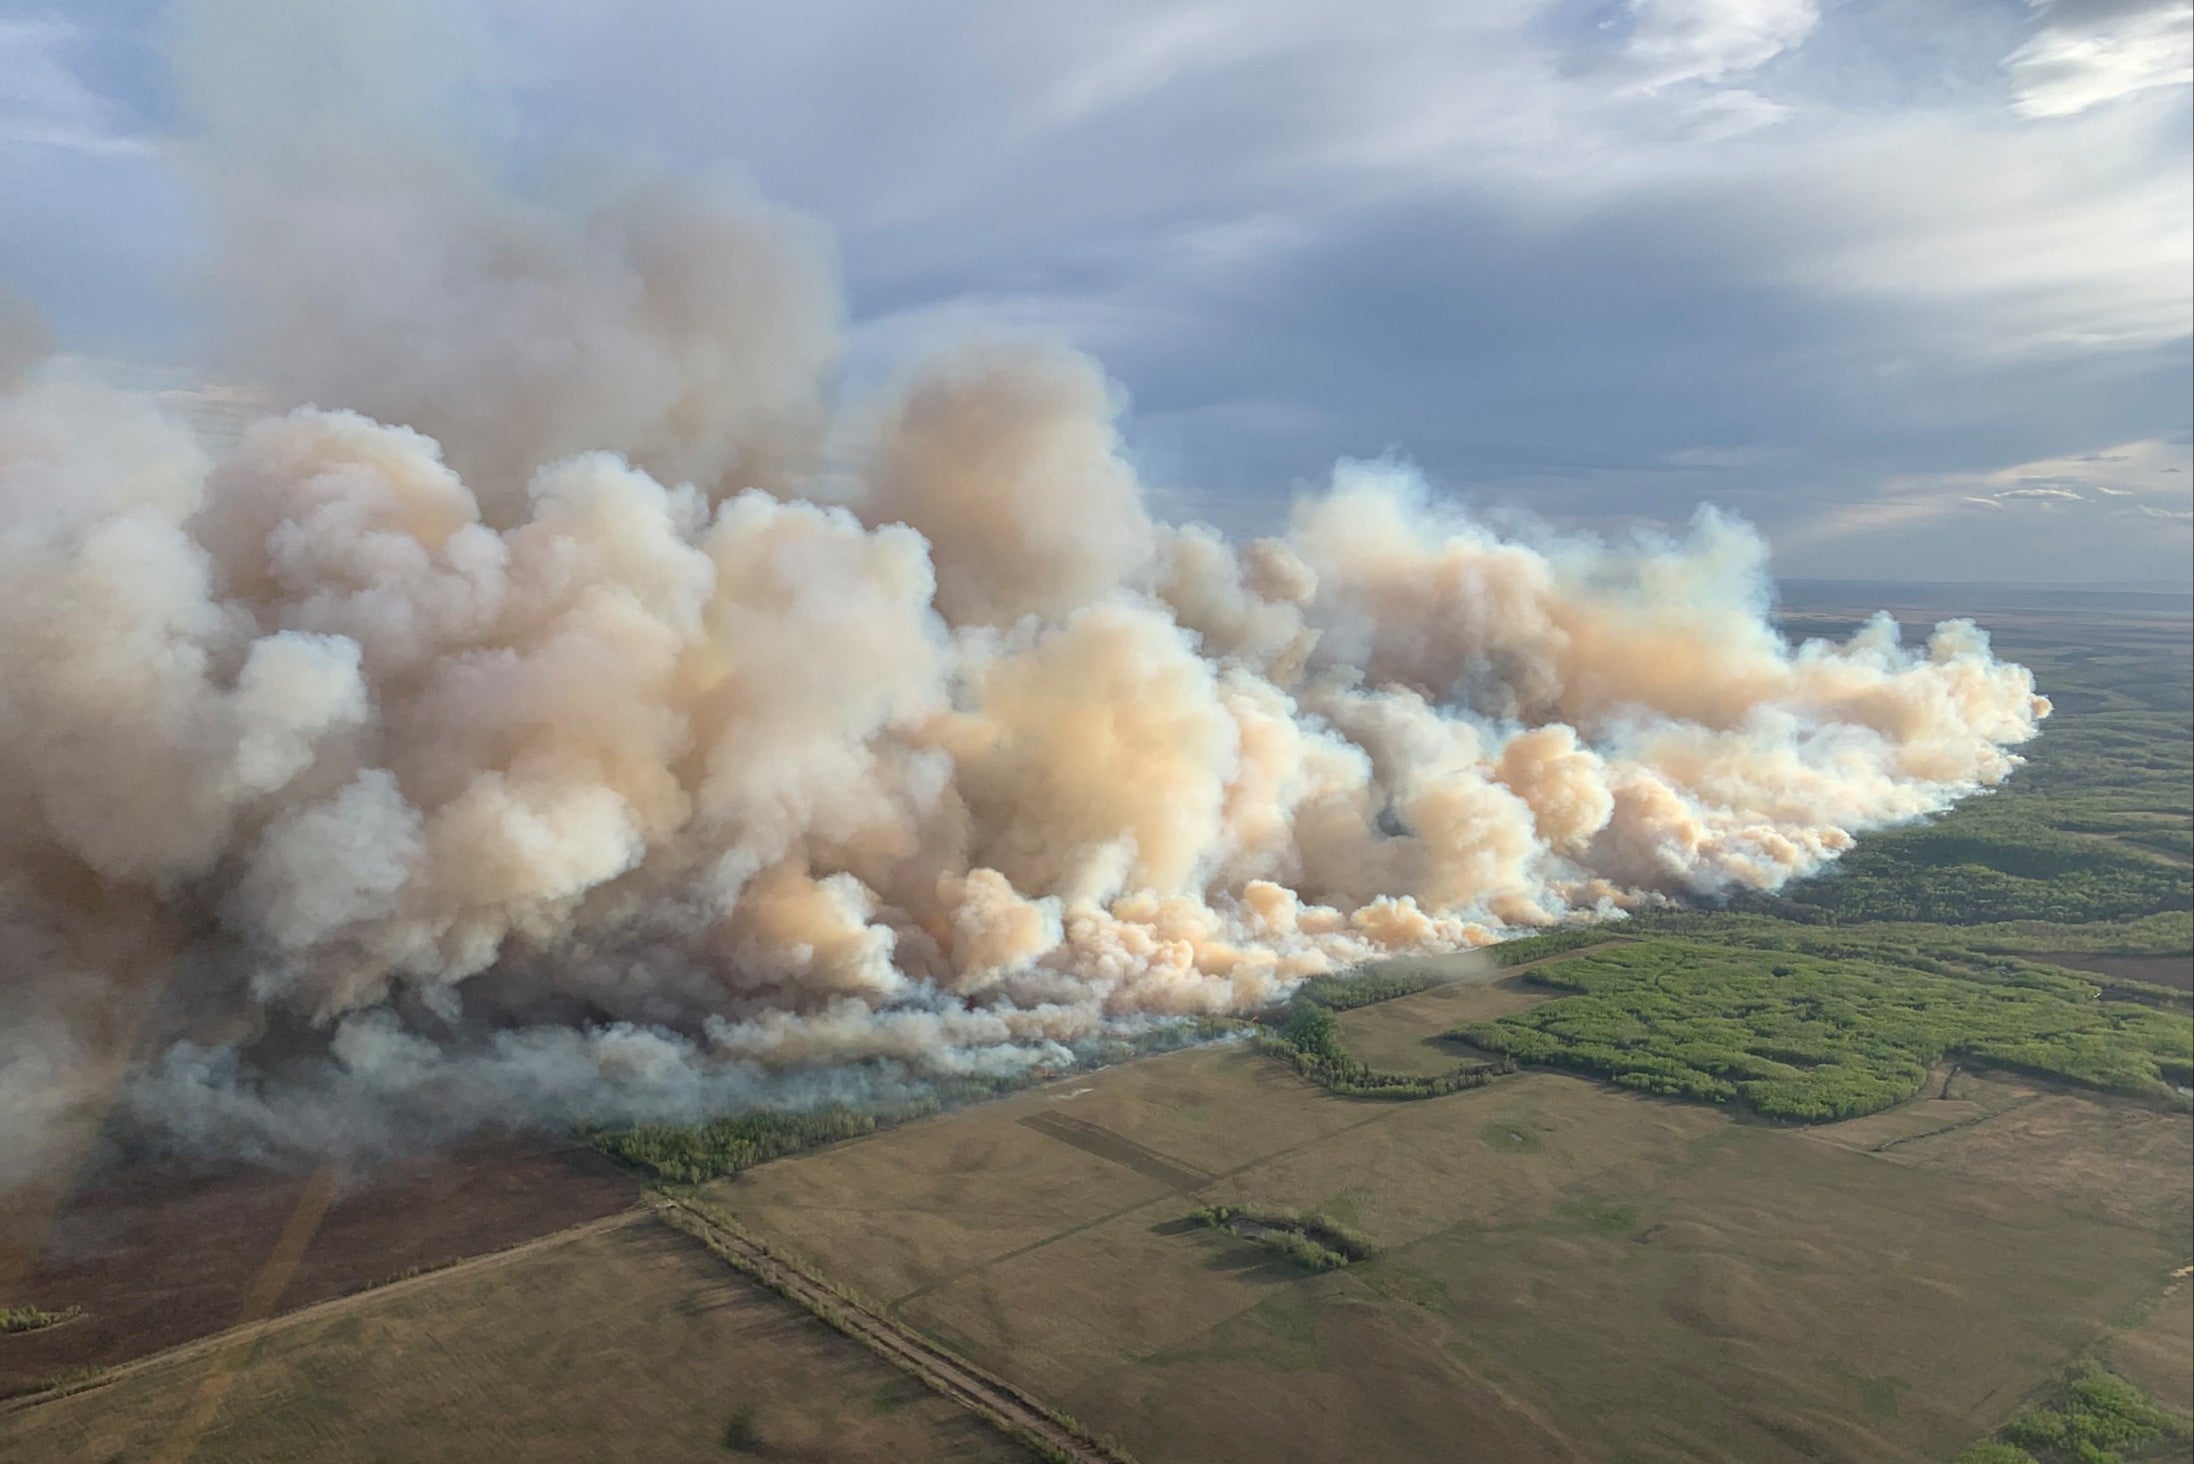 Canada’s first major wildfires of the year have spread to roughly 30 square miles